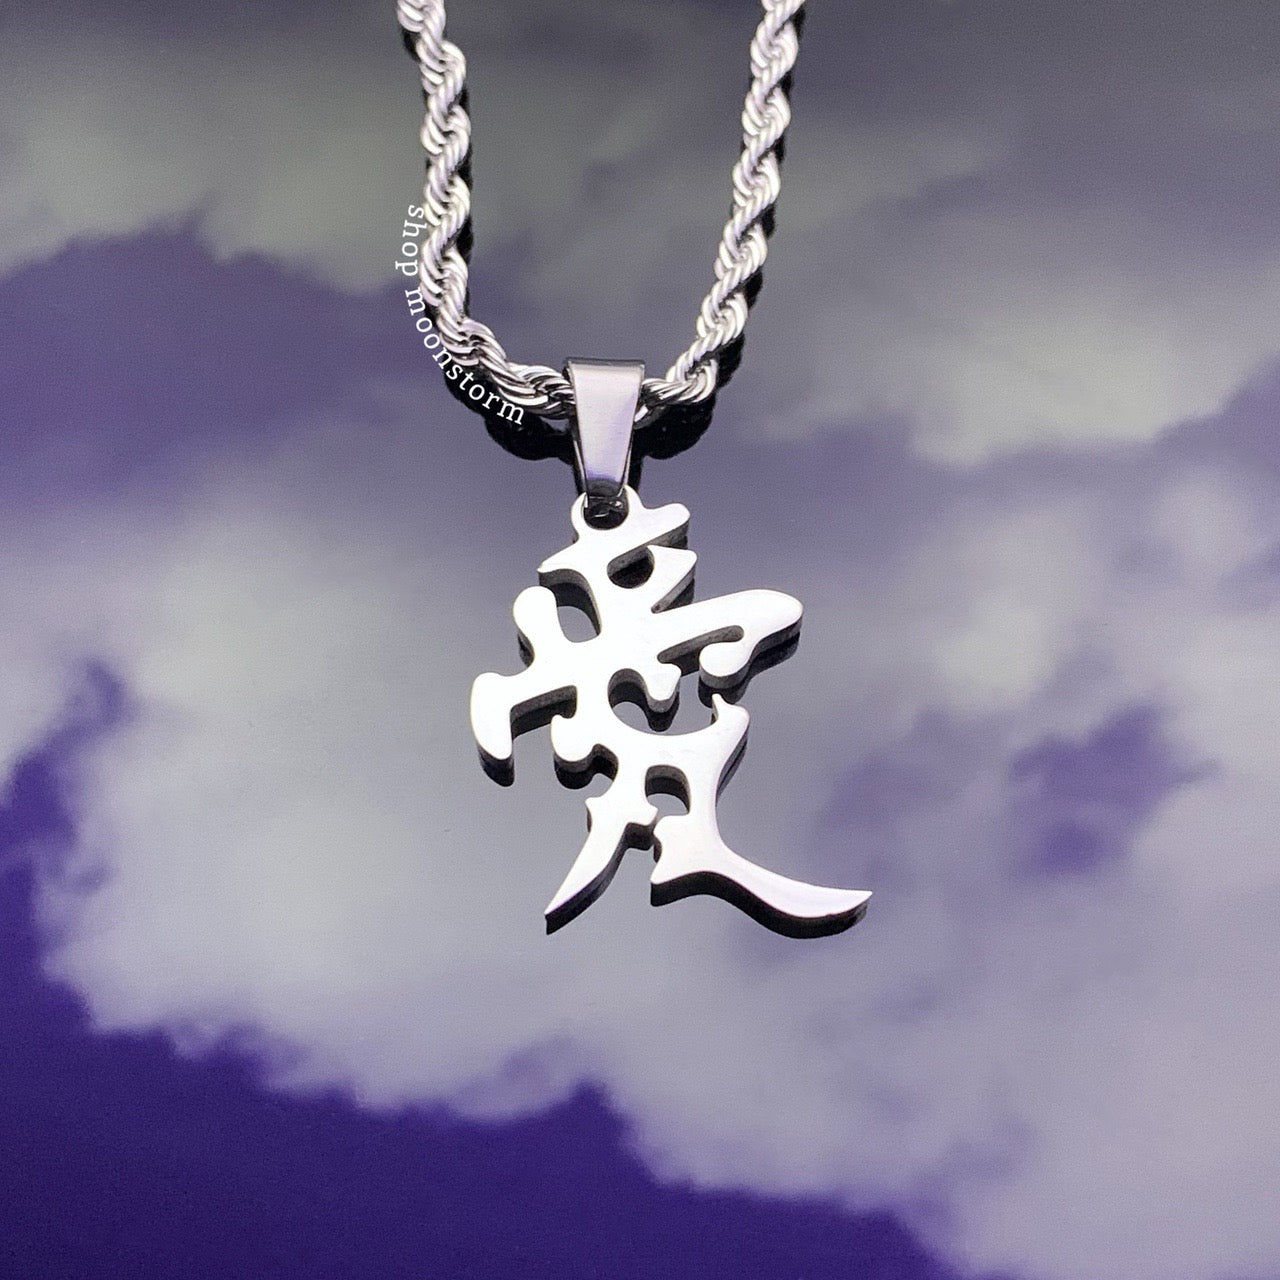 Chinese "Love" Character Necklace